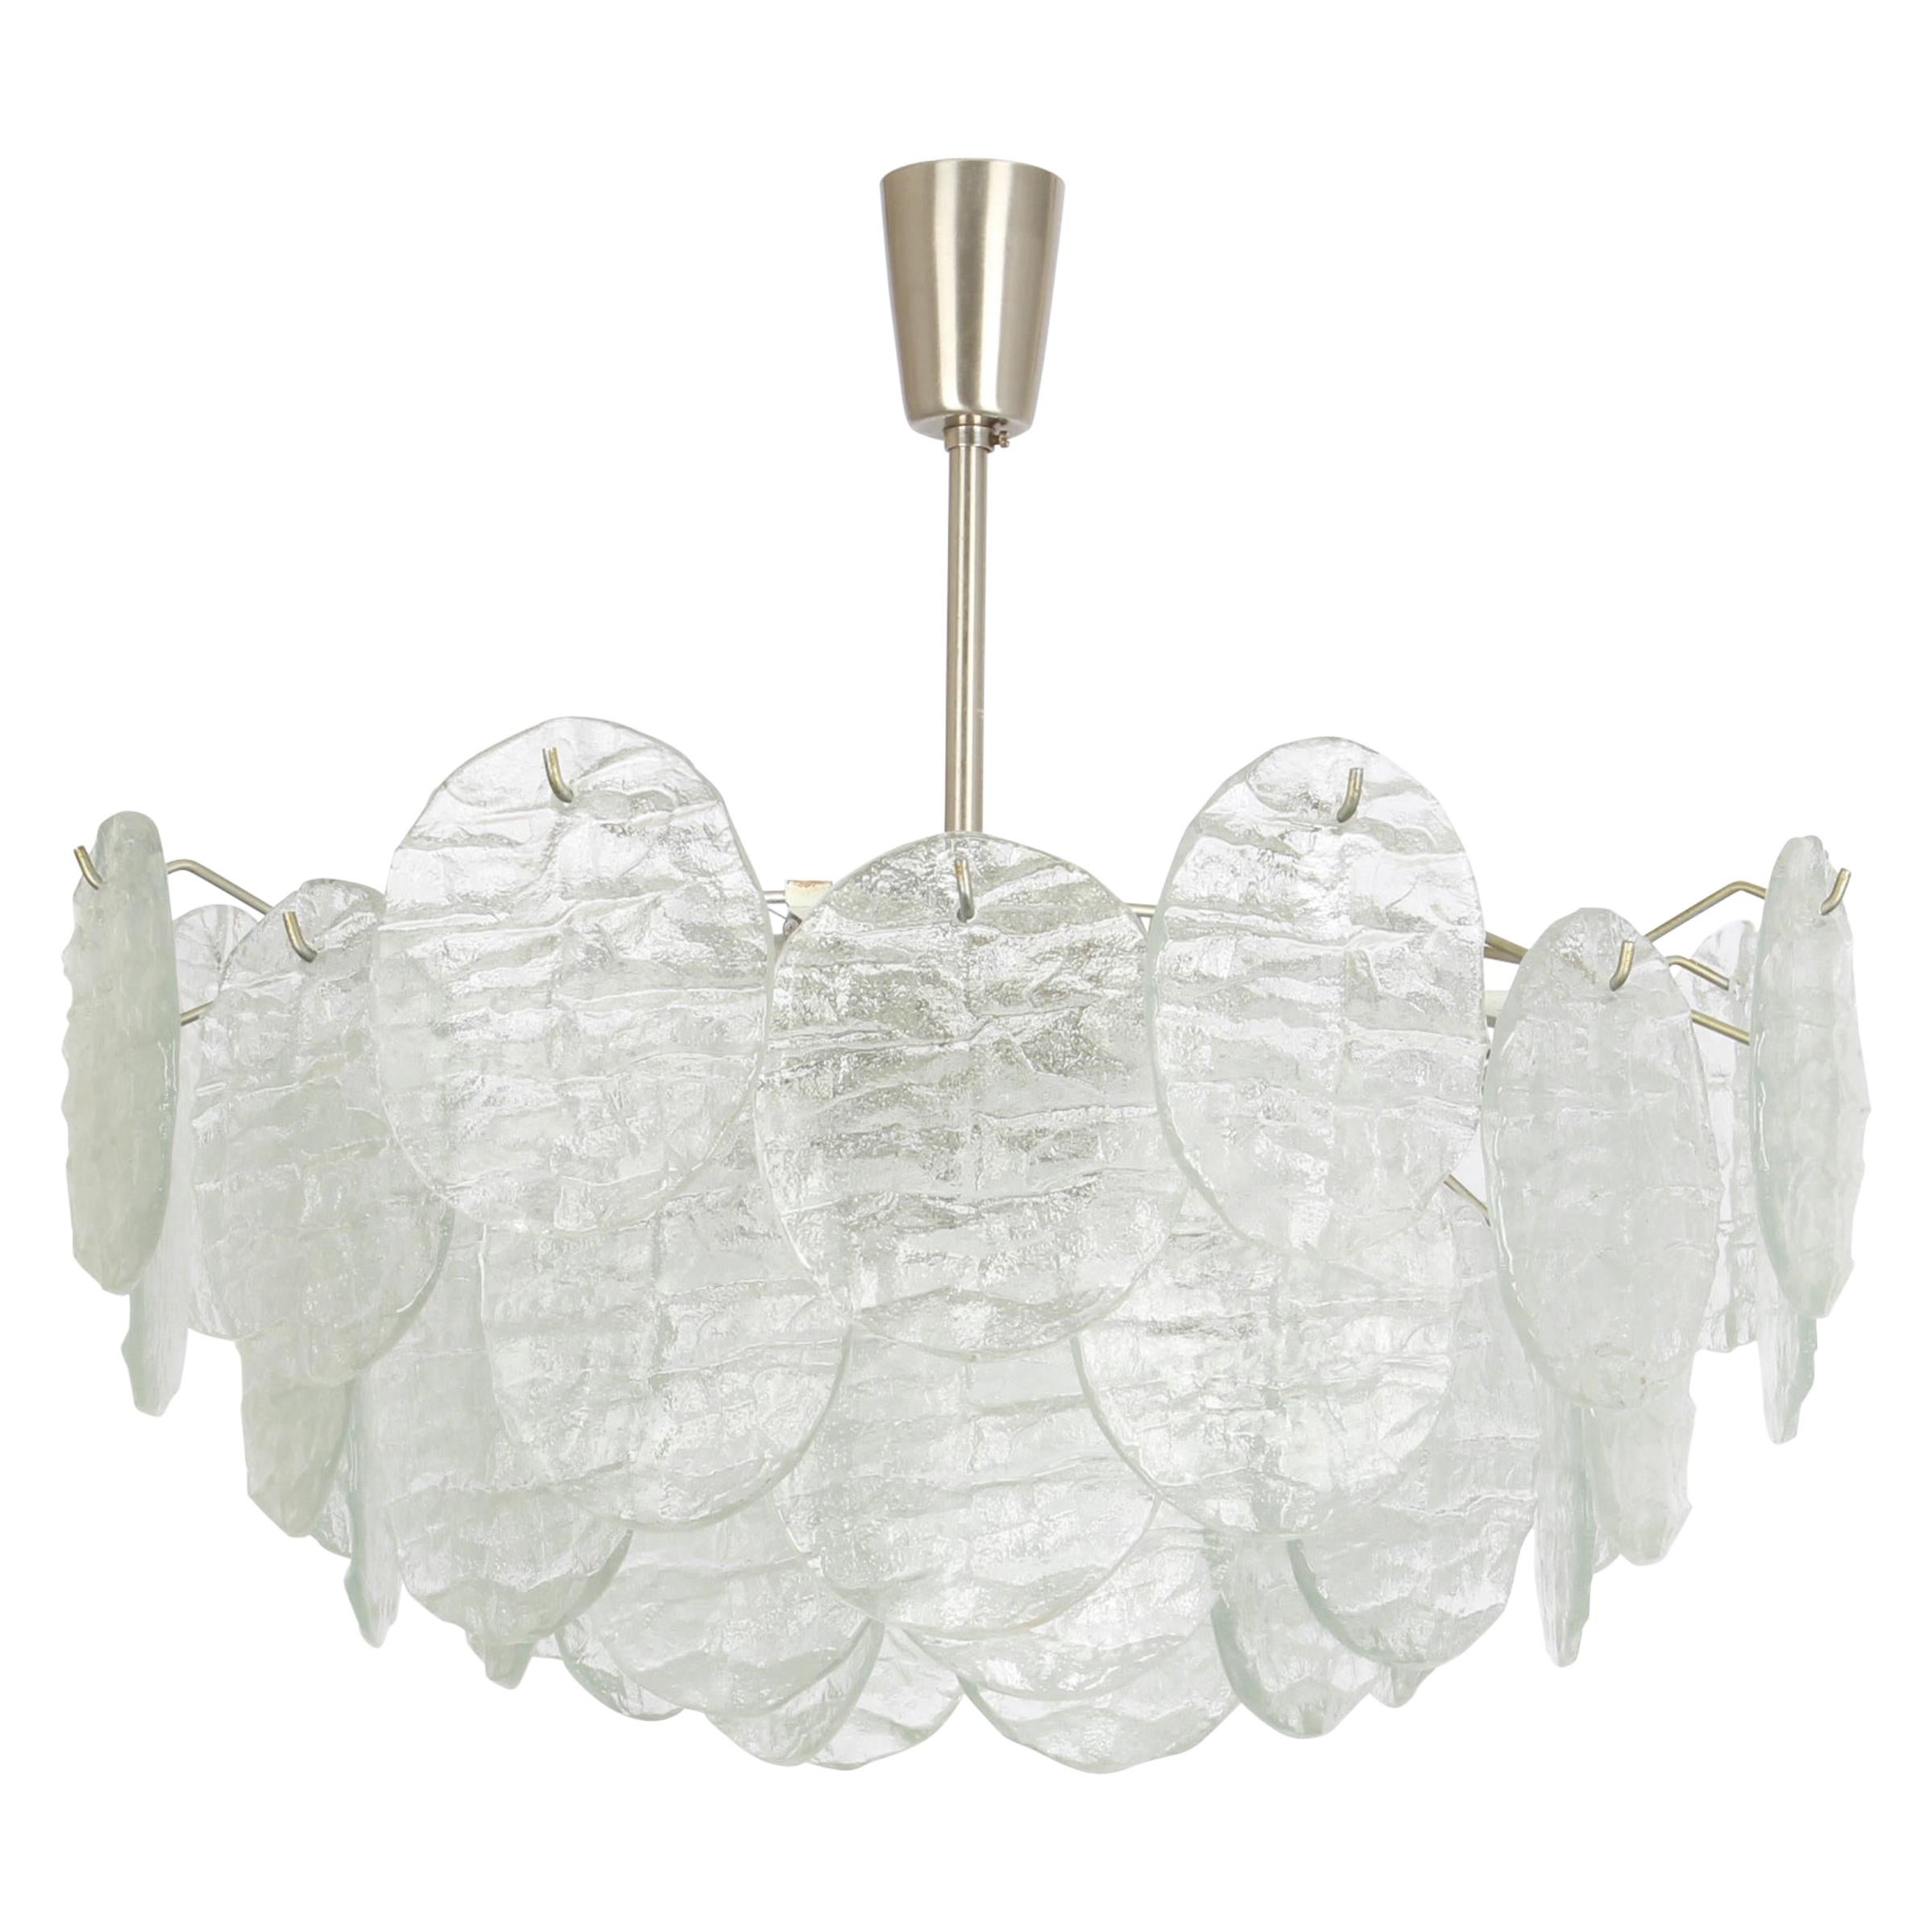 Stunning Murano glass chandelier by Kalmar, 1960s
Five tiers structure gathering 44 disc-shaped glasses in the form of leaves hang on a nickel-plated wireframe, beautifully refracting the light.

High quality and in very good condition with minor